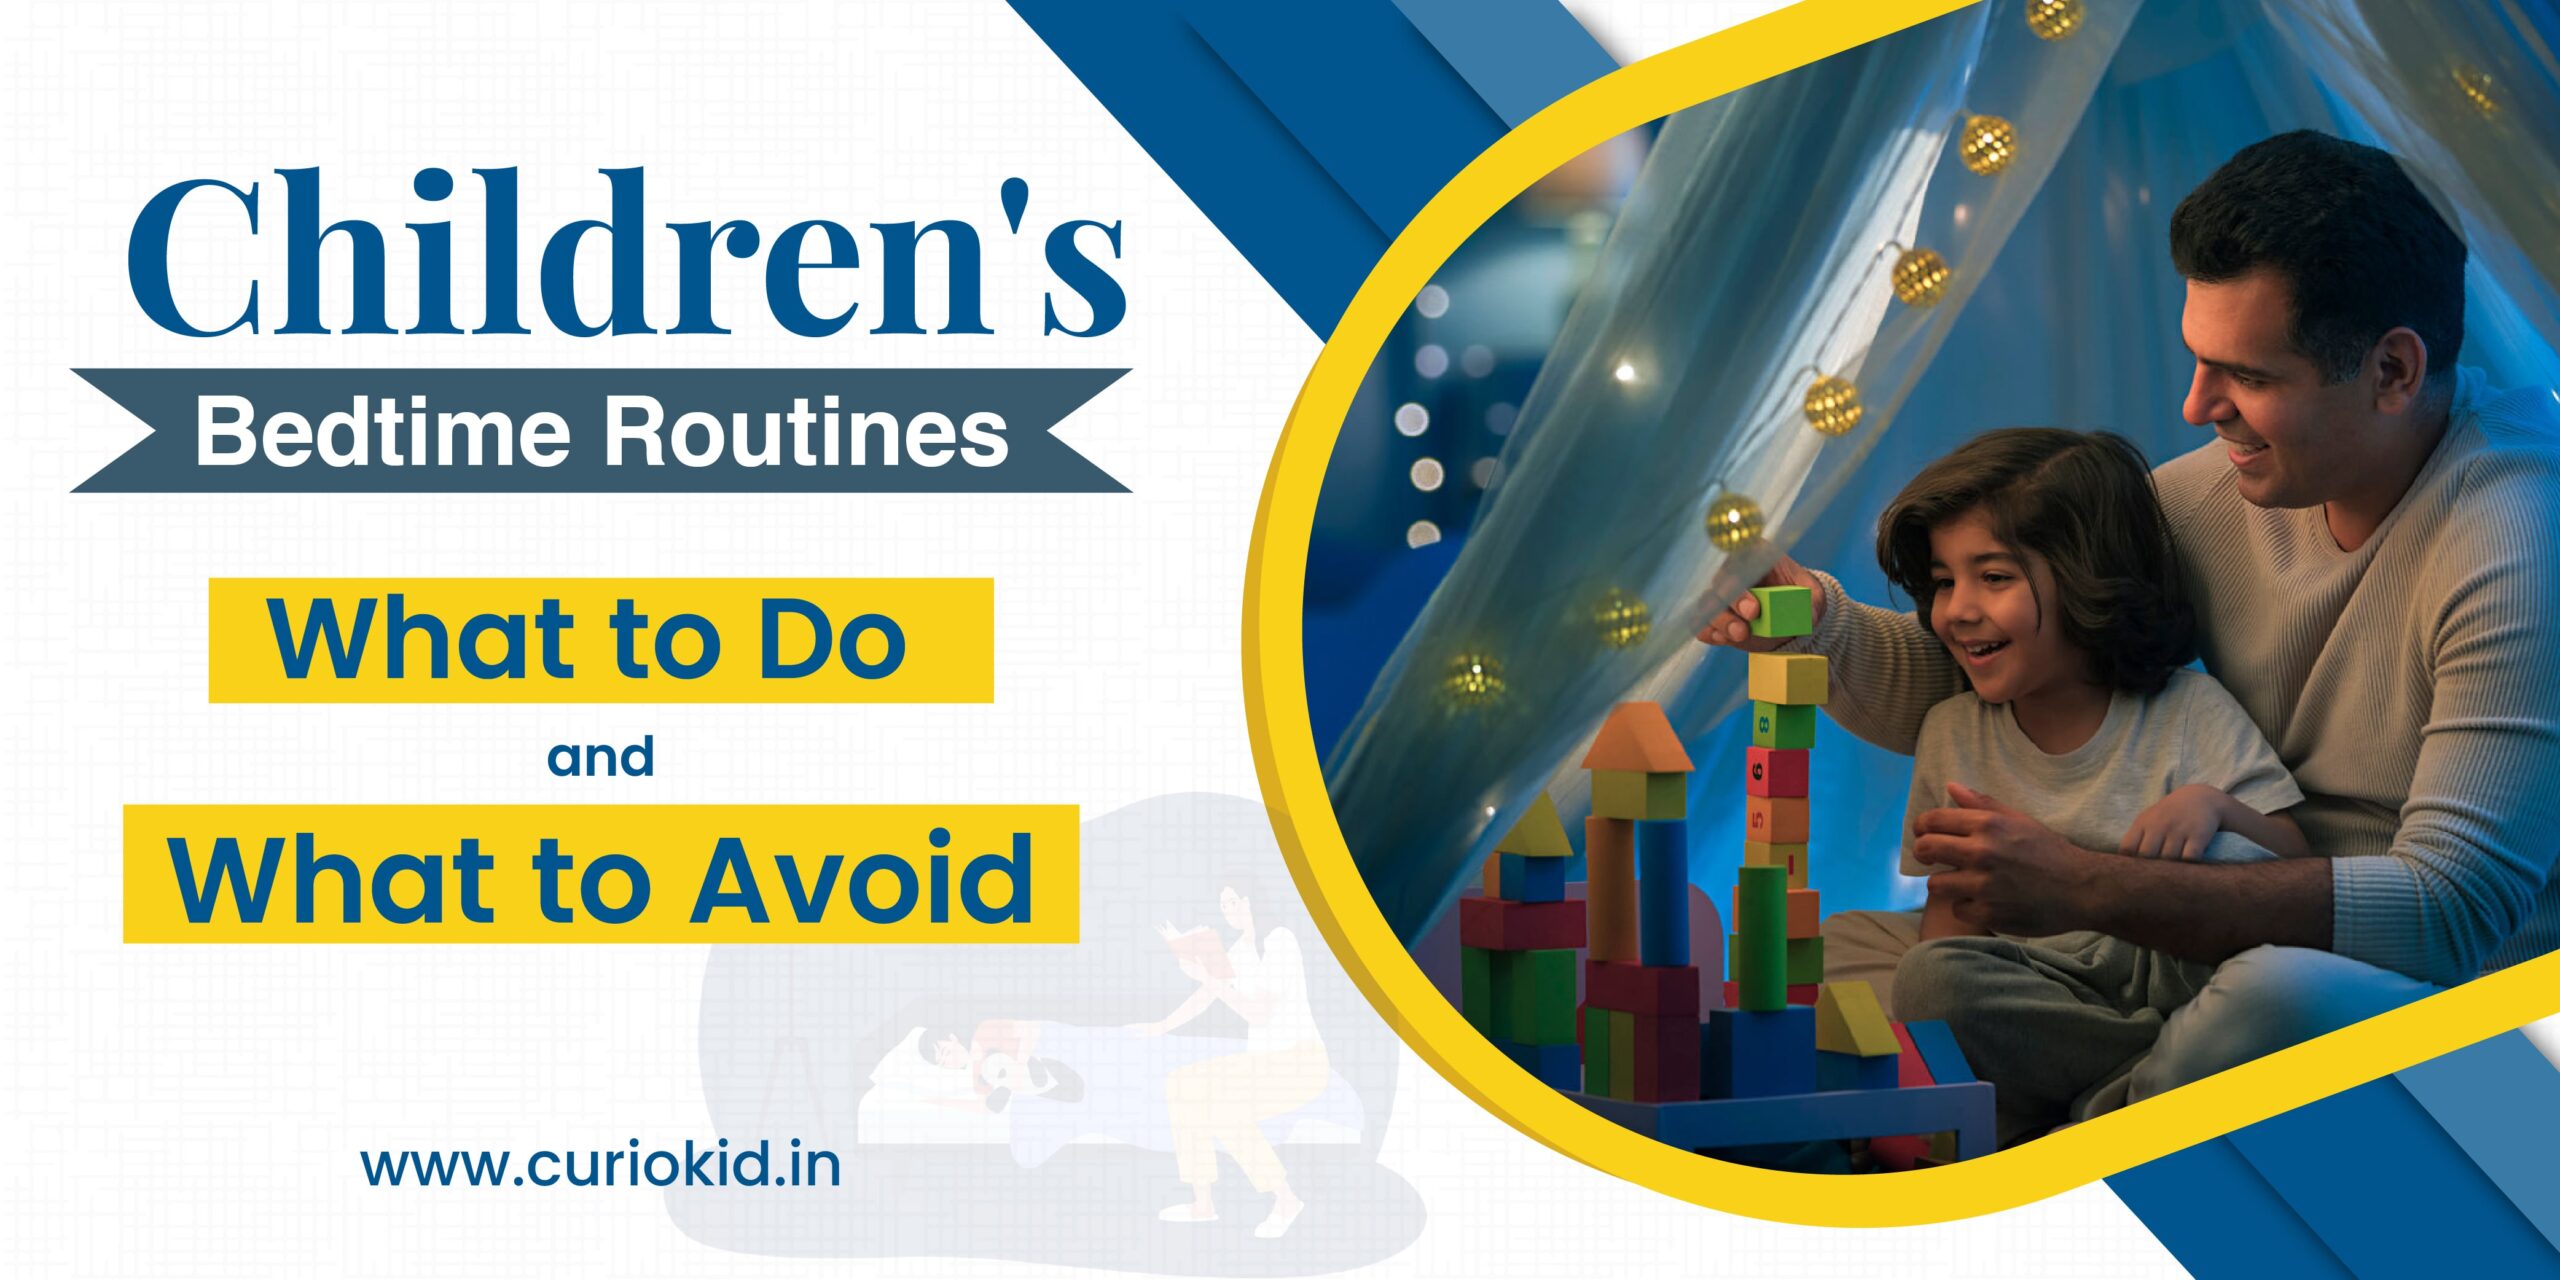 Children’s Bedtime Routines: What to Do and What to Avoid?